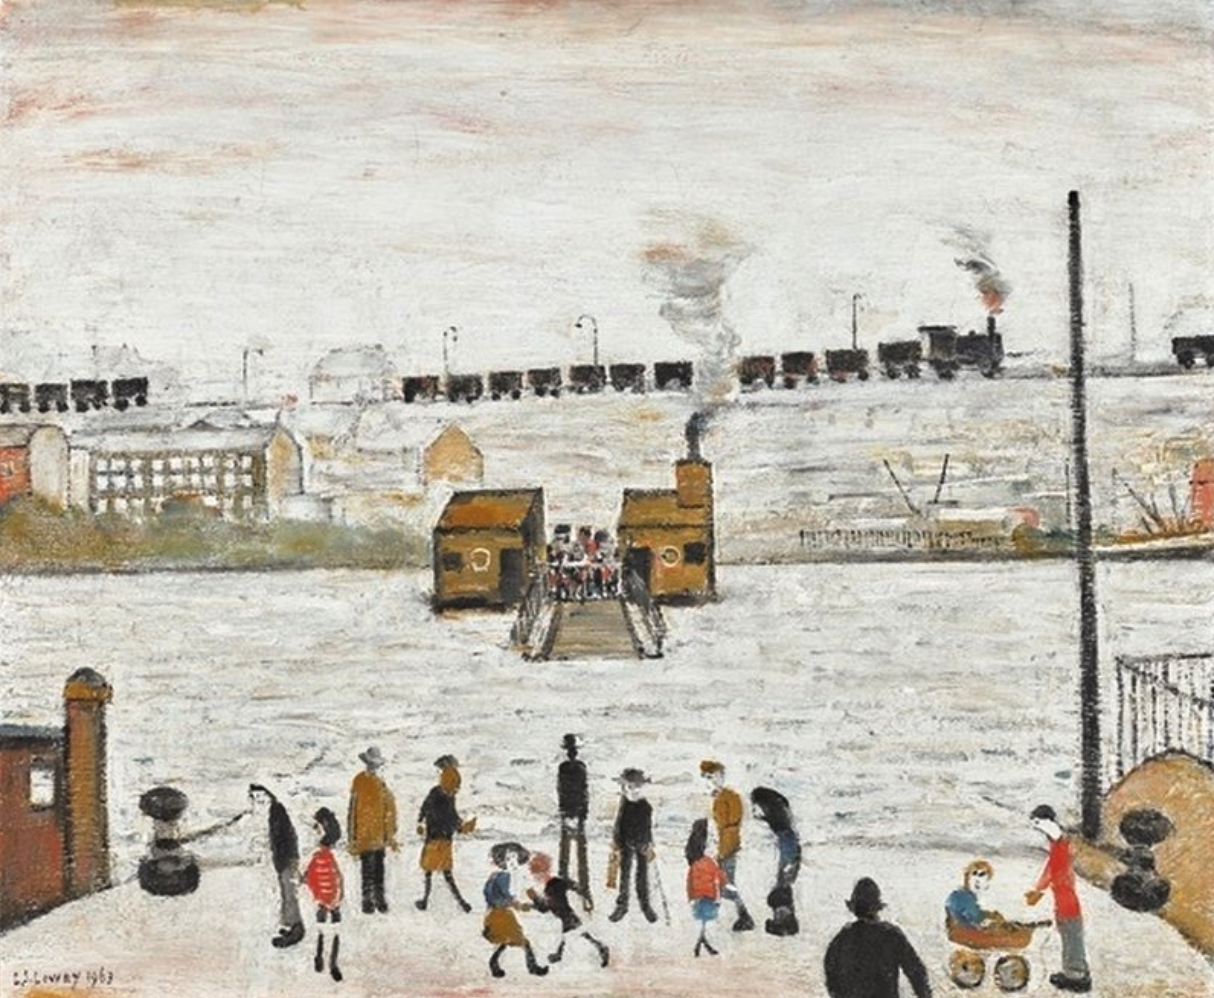 The Ferry at Blyth (1963) by Laurence Stephen Lowry (1887 - 1976), English artist.